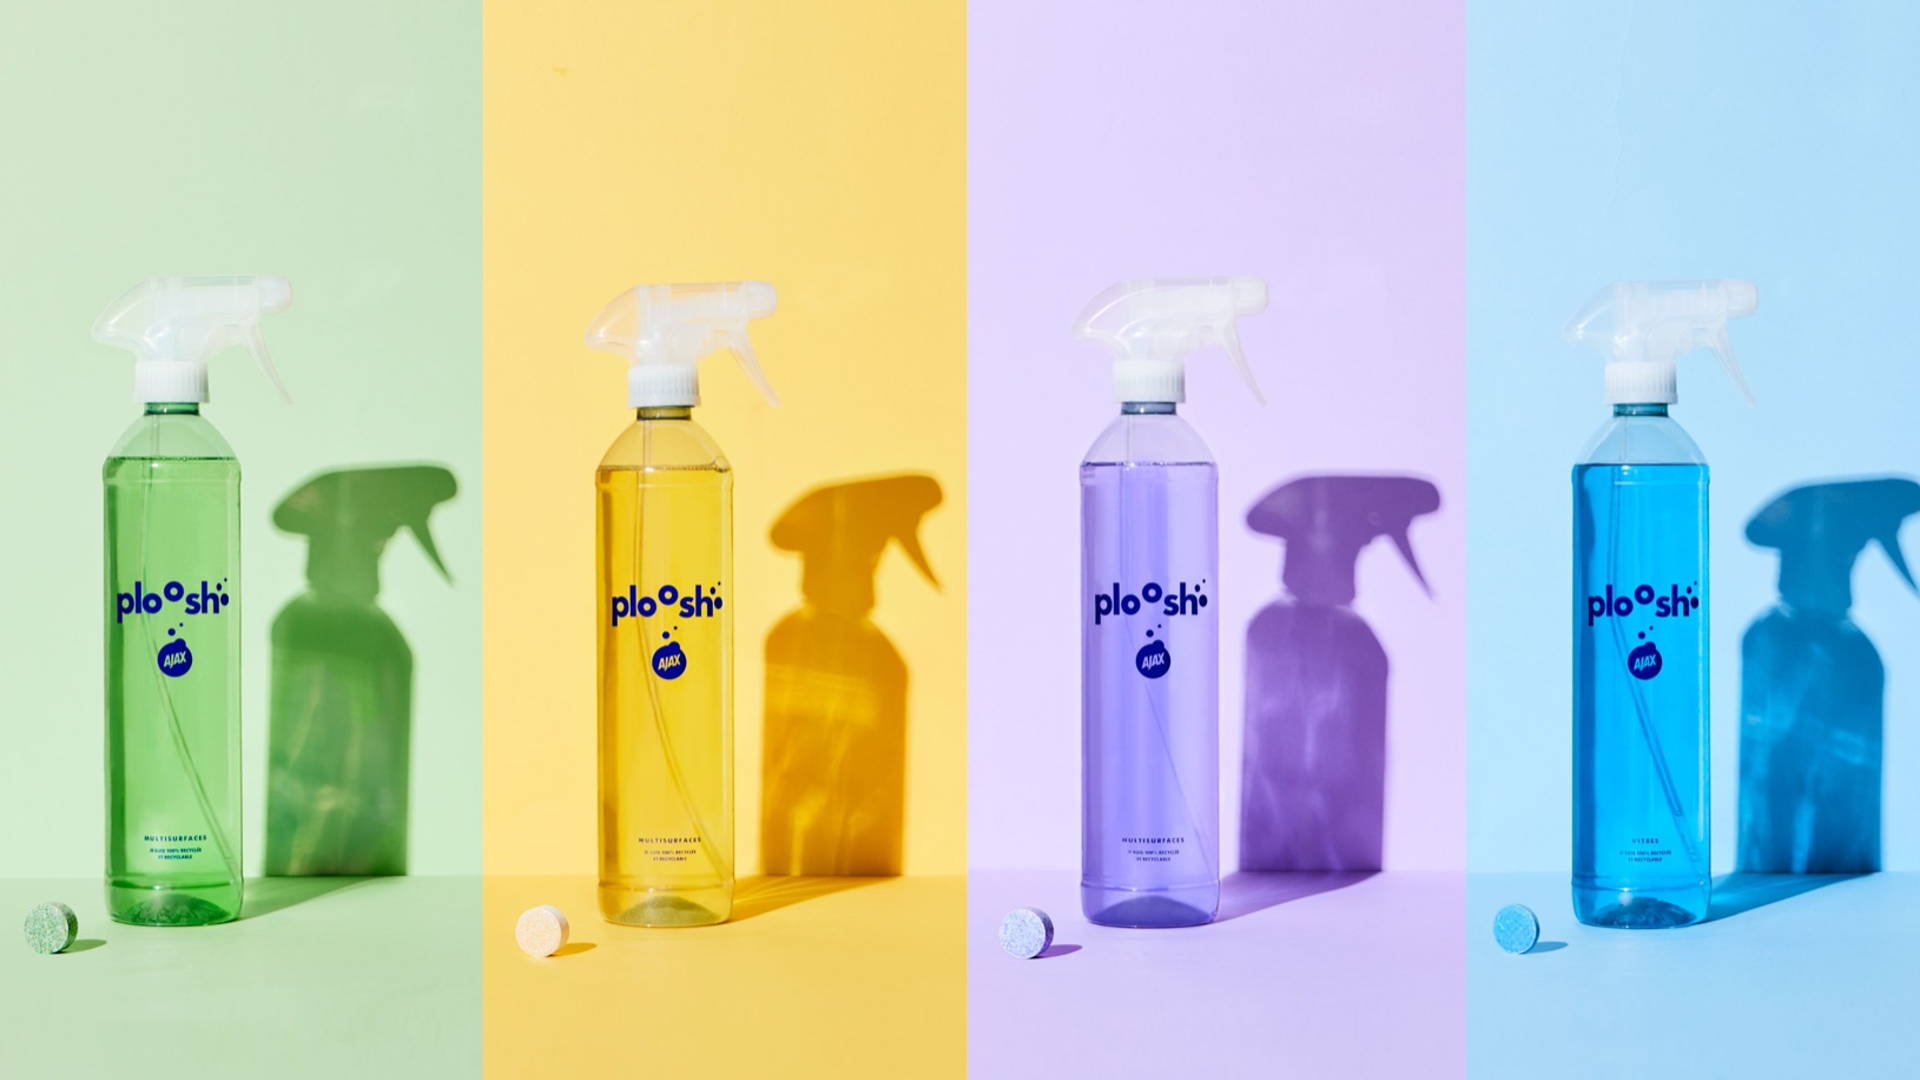 Featured image for Ajax Ploosh: A Trusted Brand Accelerating Zero Waste Cleaning